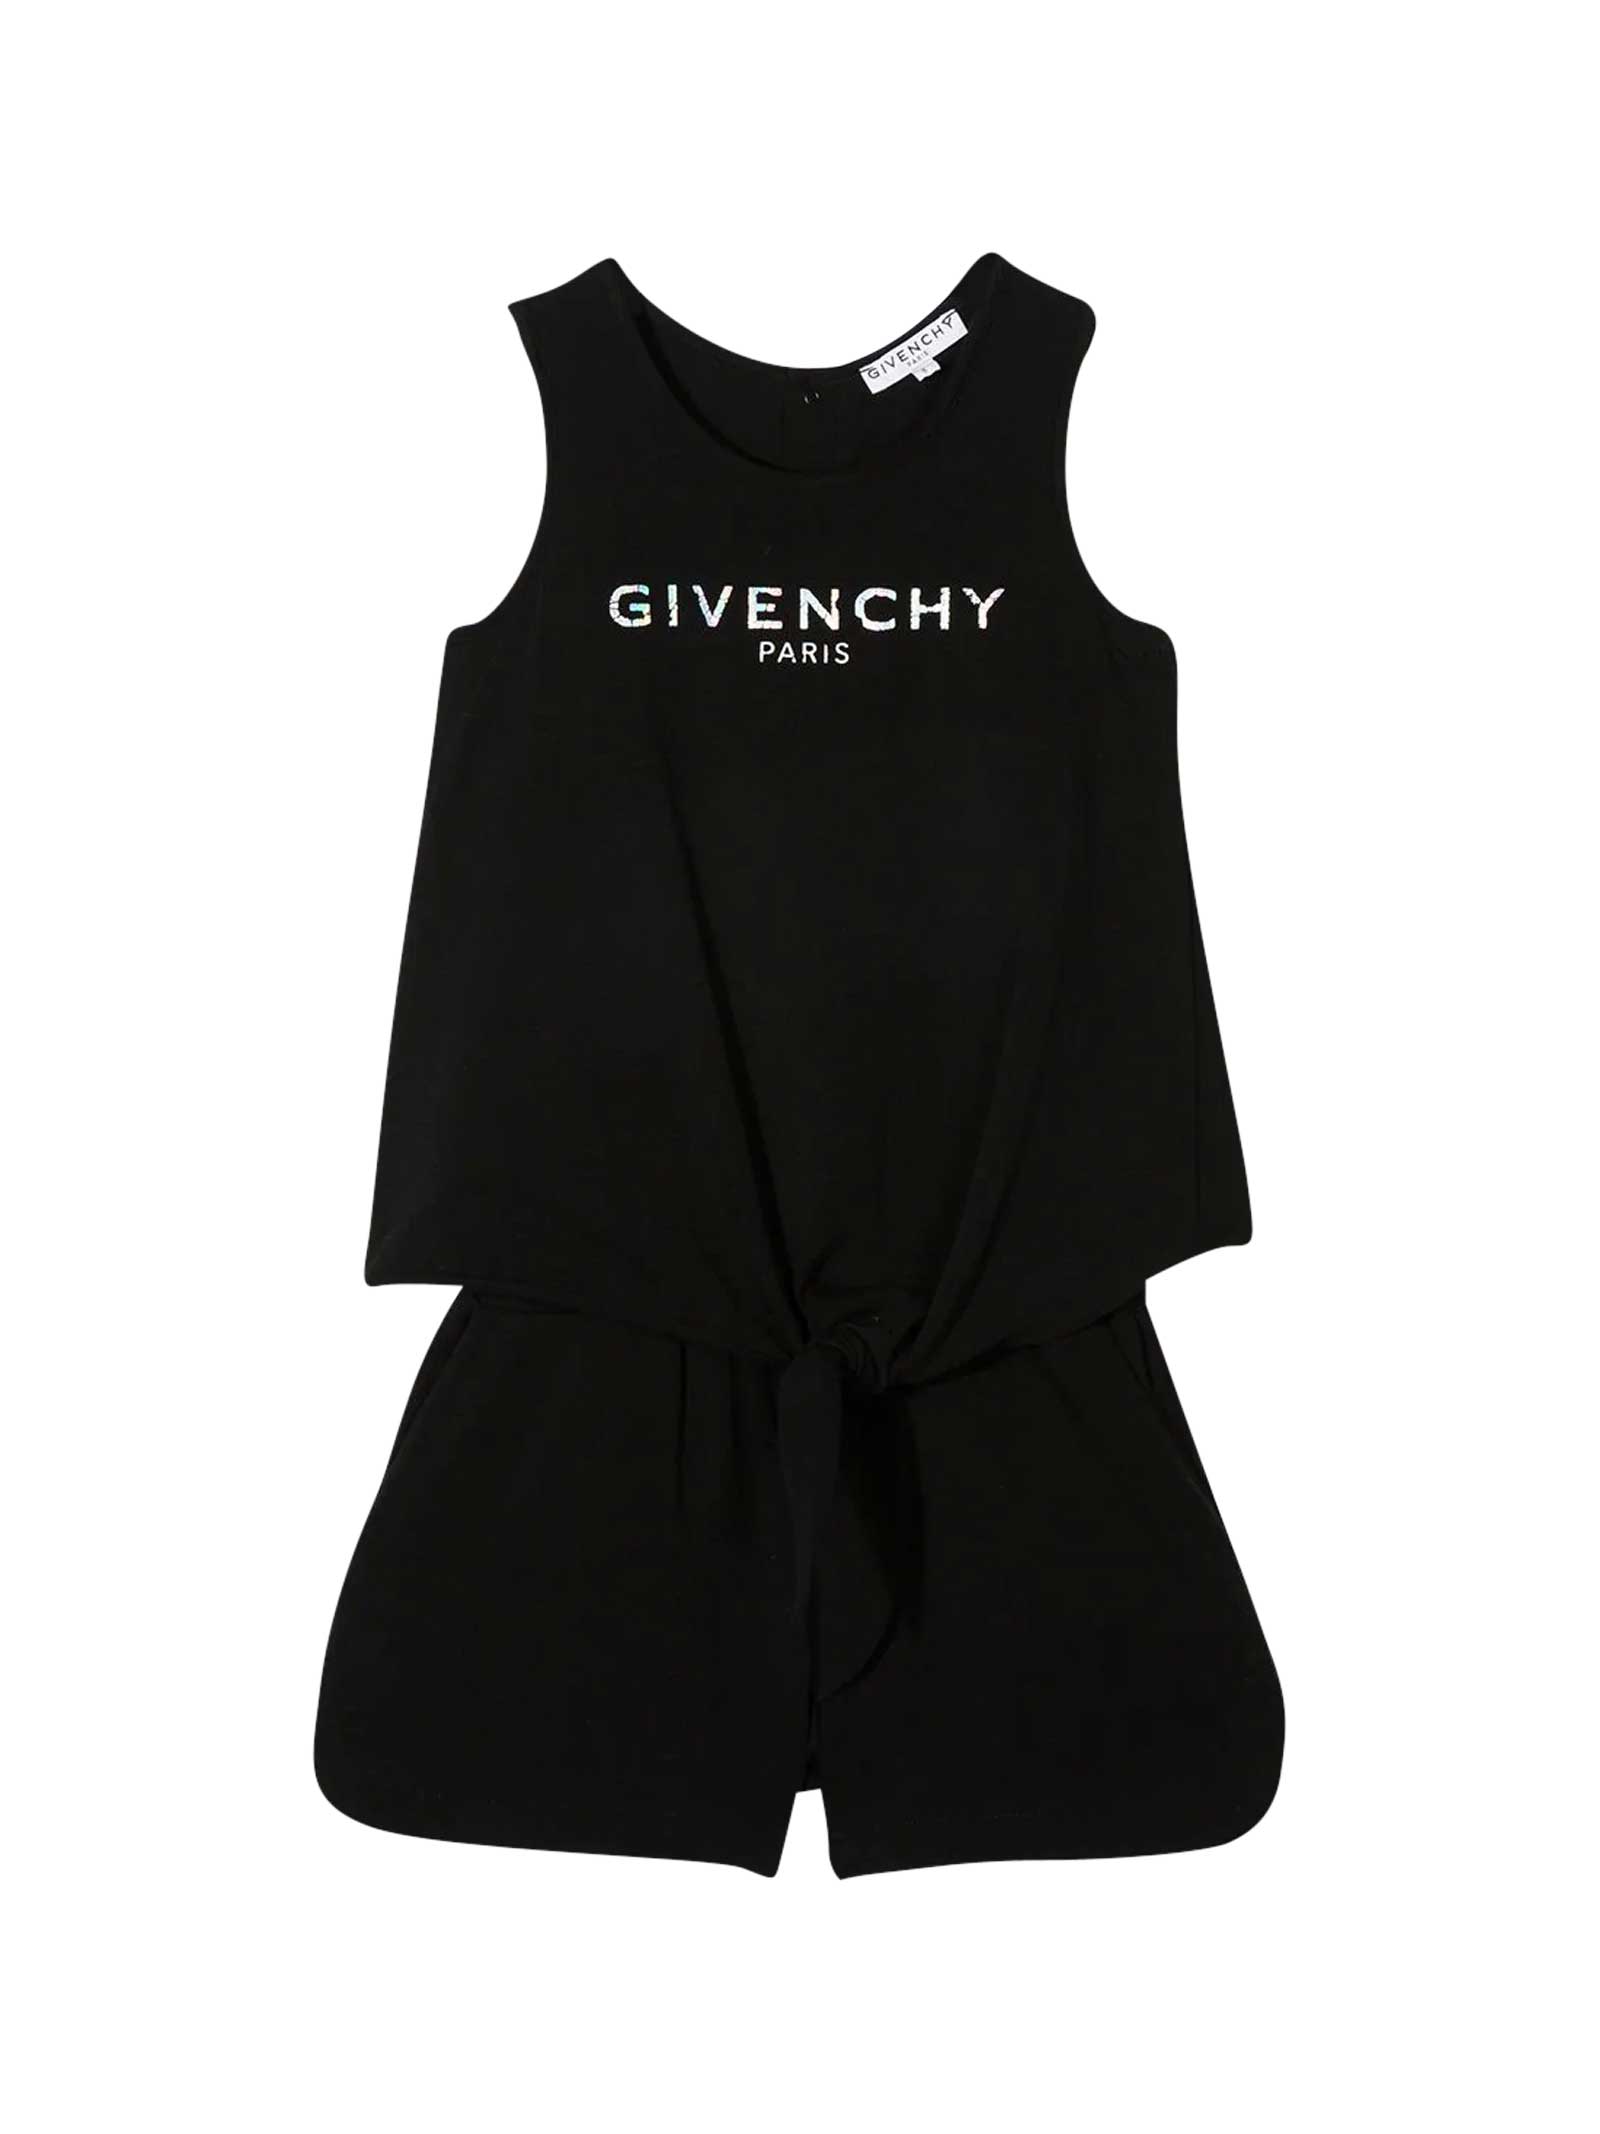 Givenchy Black Outfit Teen